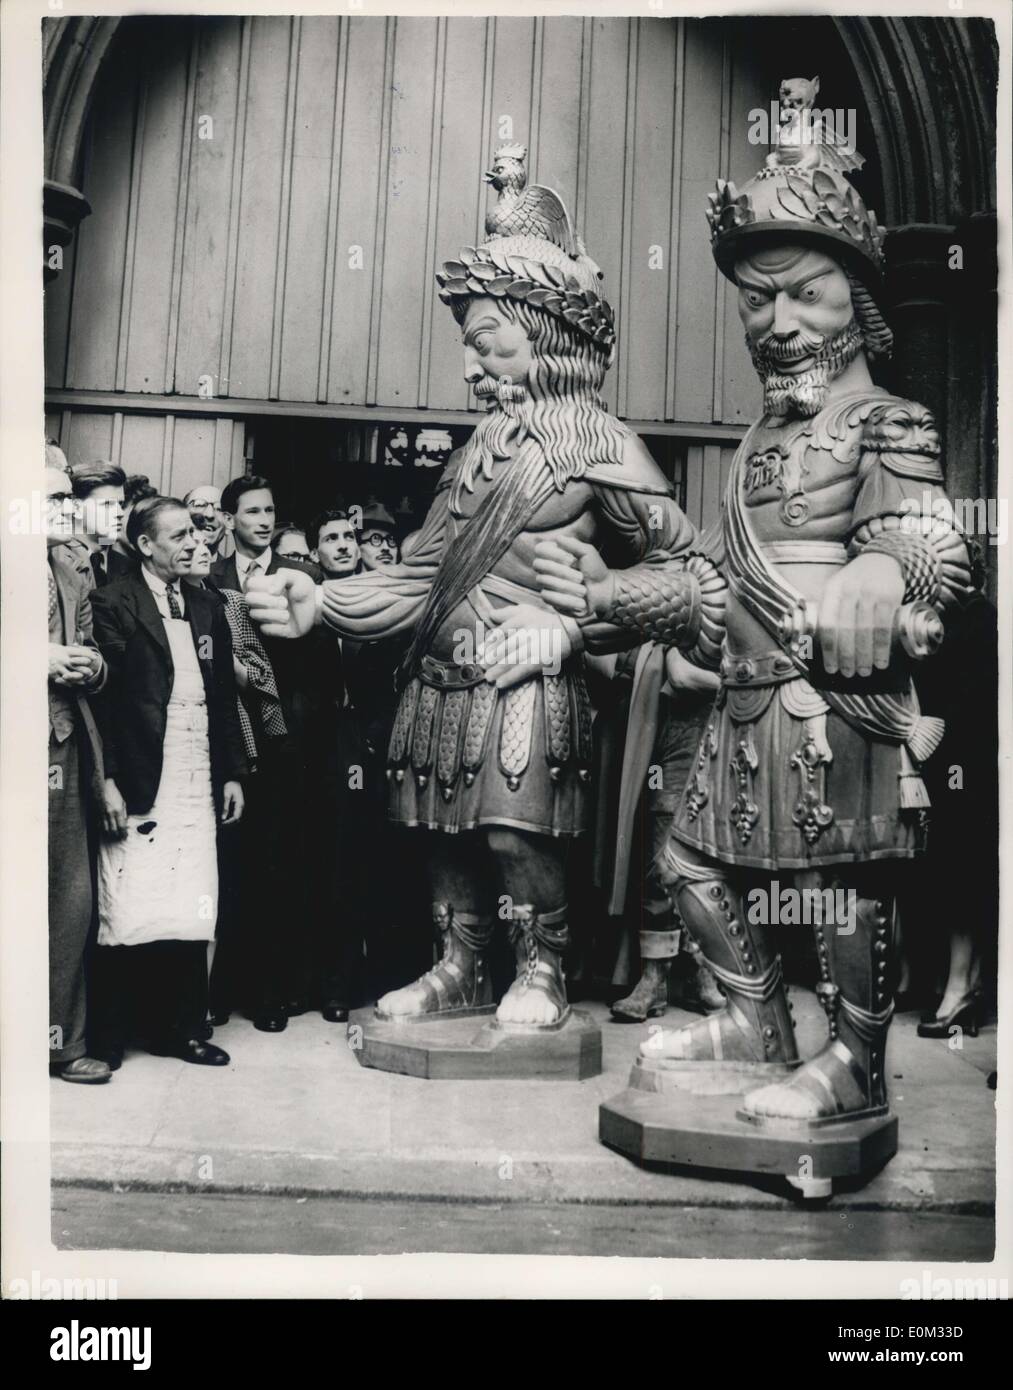 May 20, 1953 - GOG AND MAGOG, BACK AT THE GUILDHALL. Gog and Magog, the new giant effigies which are to replace those destroyed Stock Photo